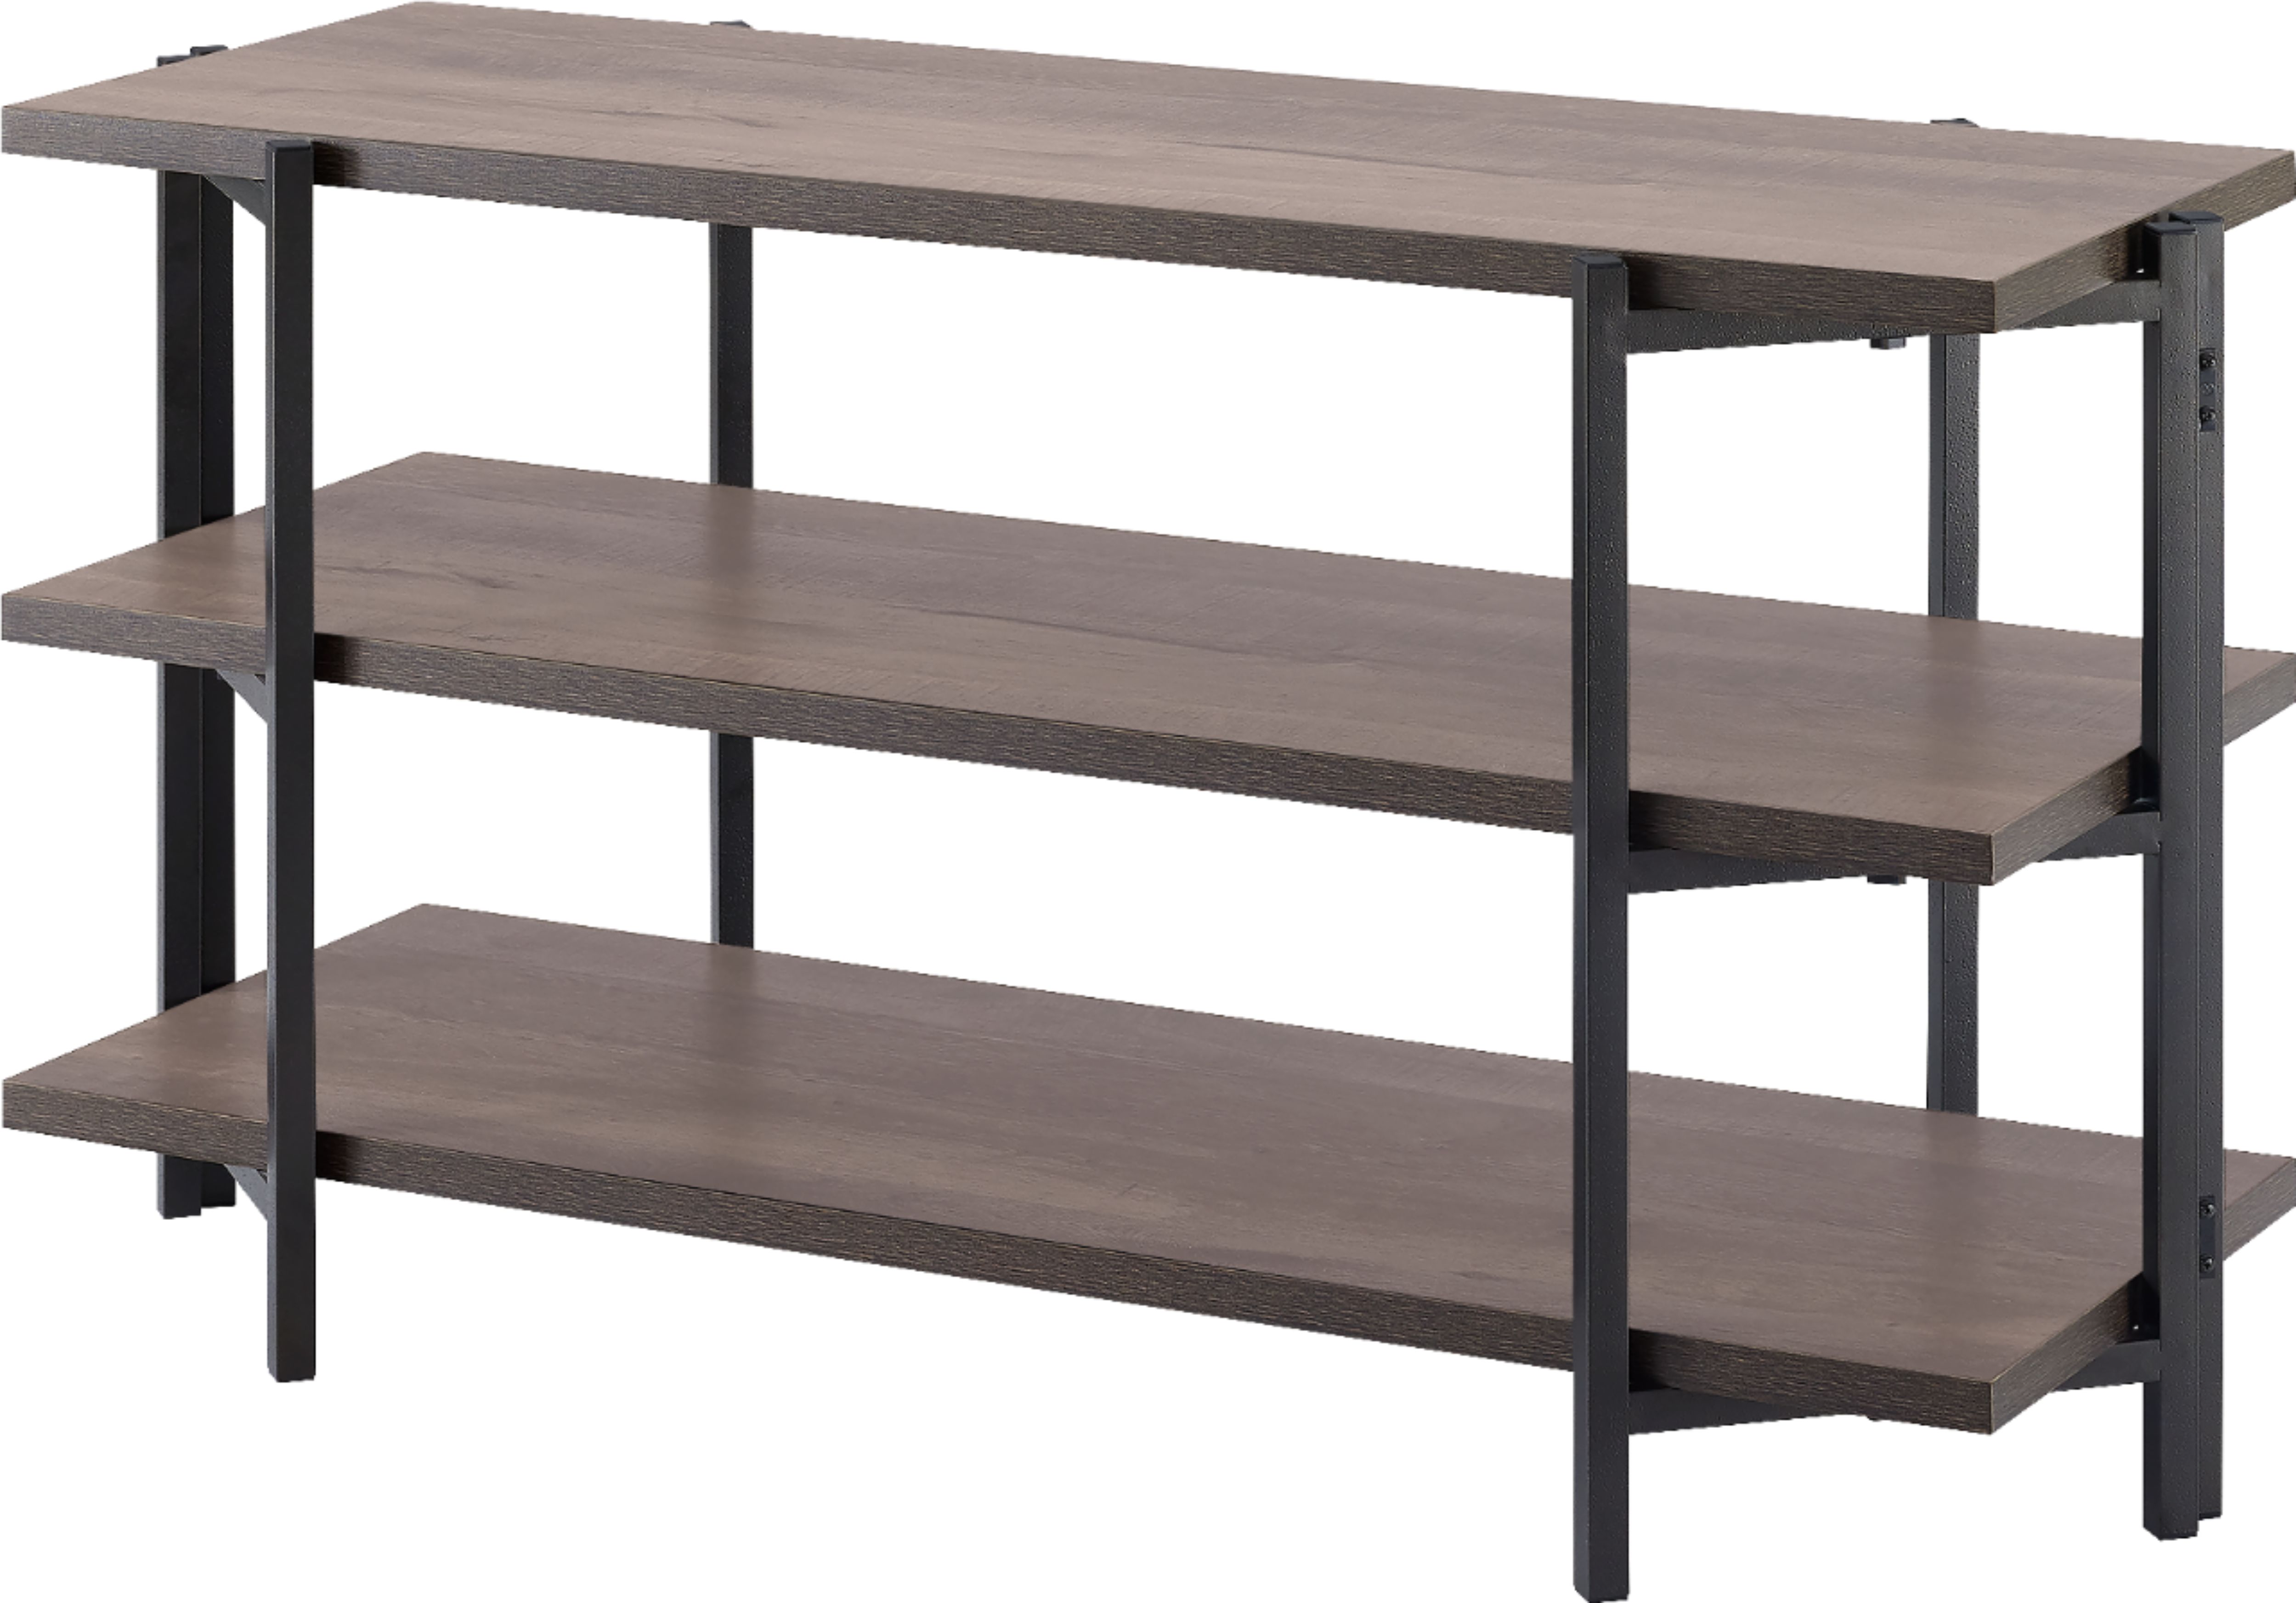 Left View: Walker Edison - Modern Open 6 Cubby Storage TV Stand for TVs up to 78" - Driftwood